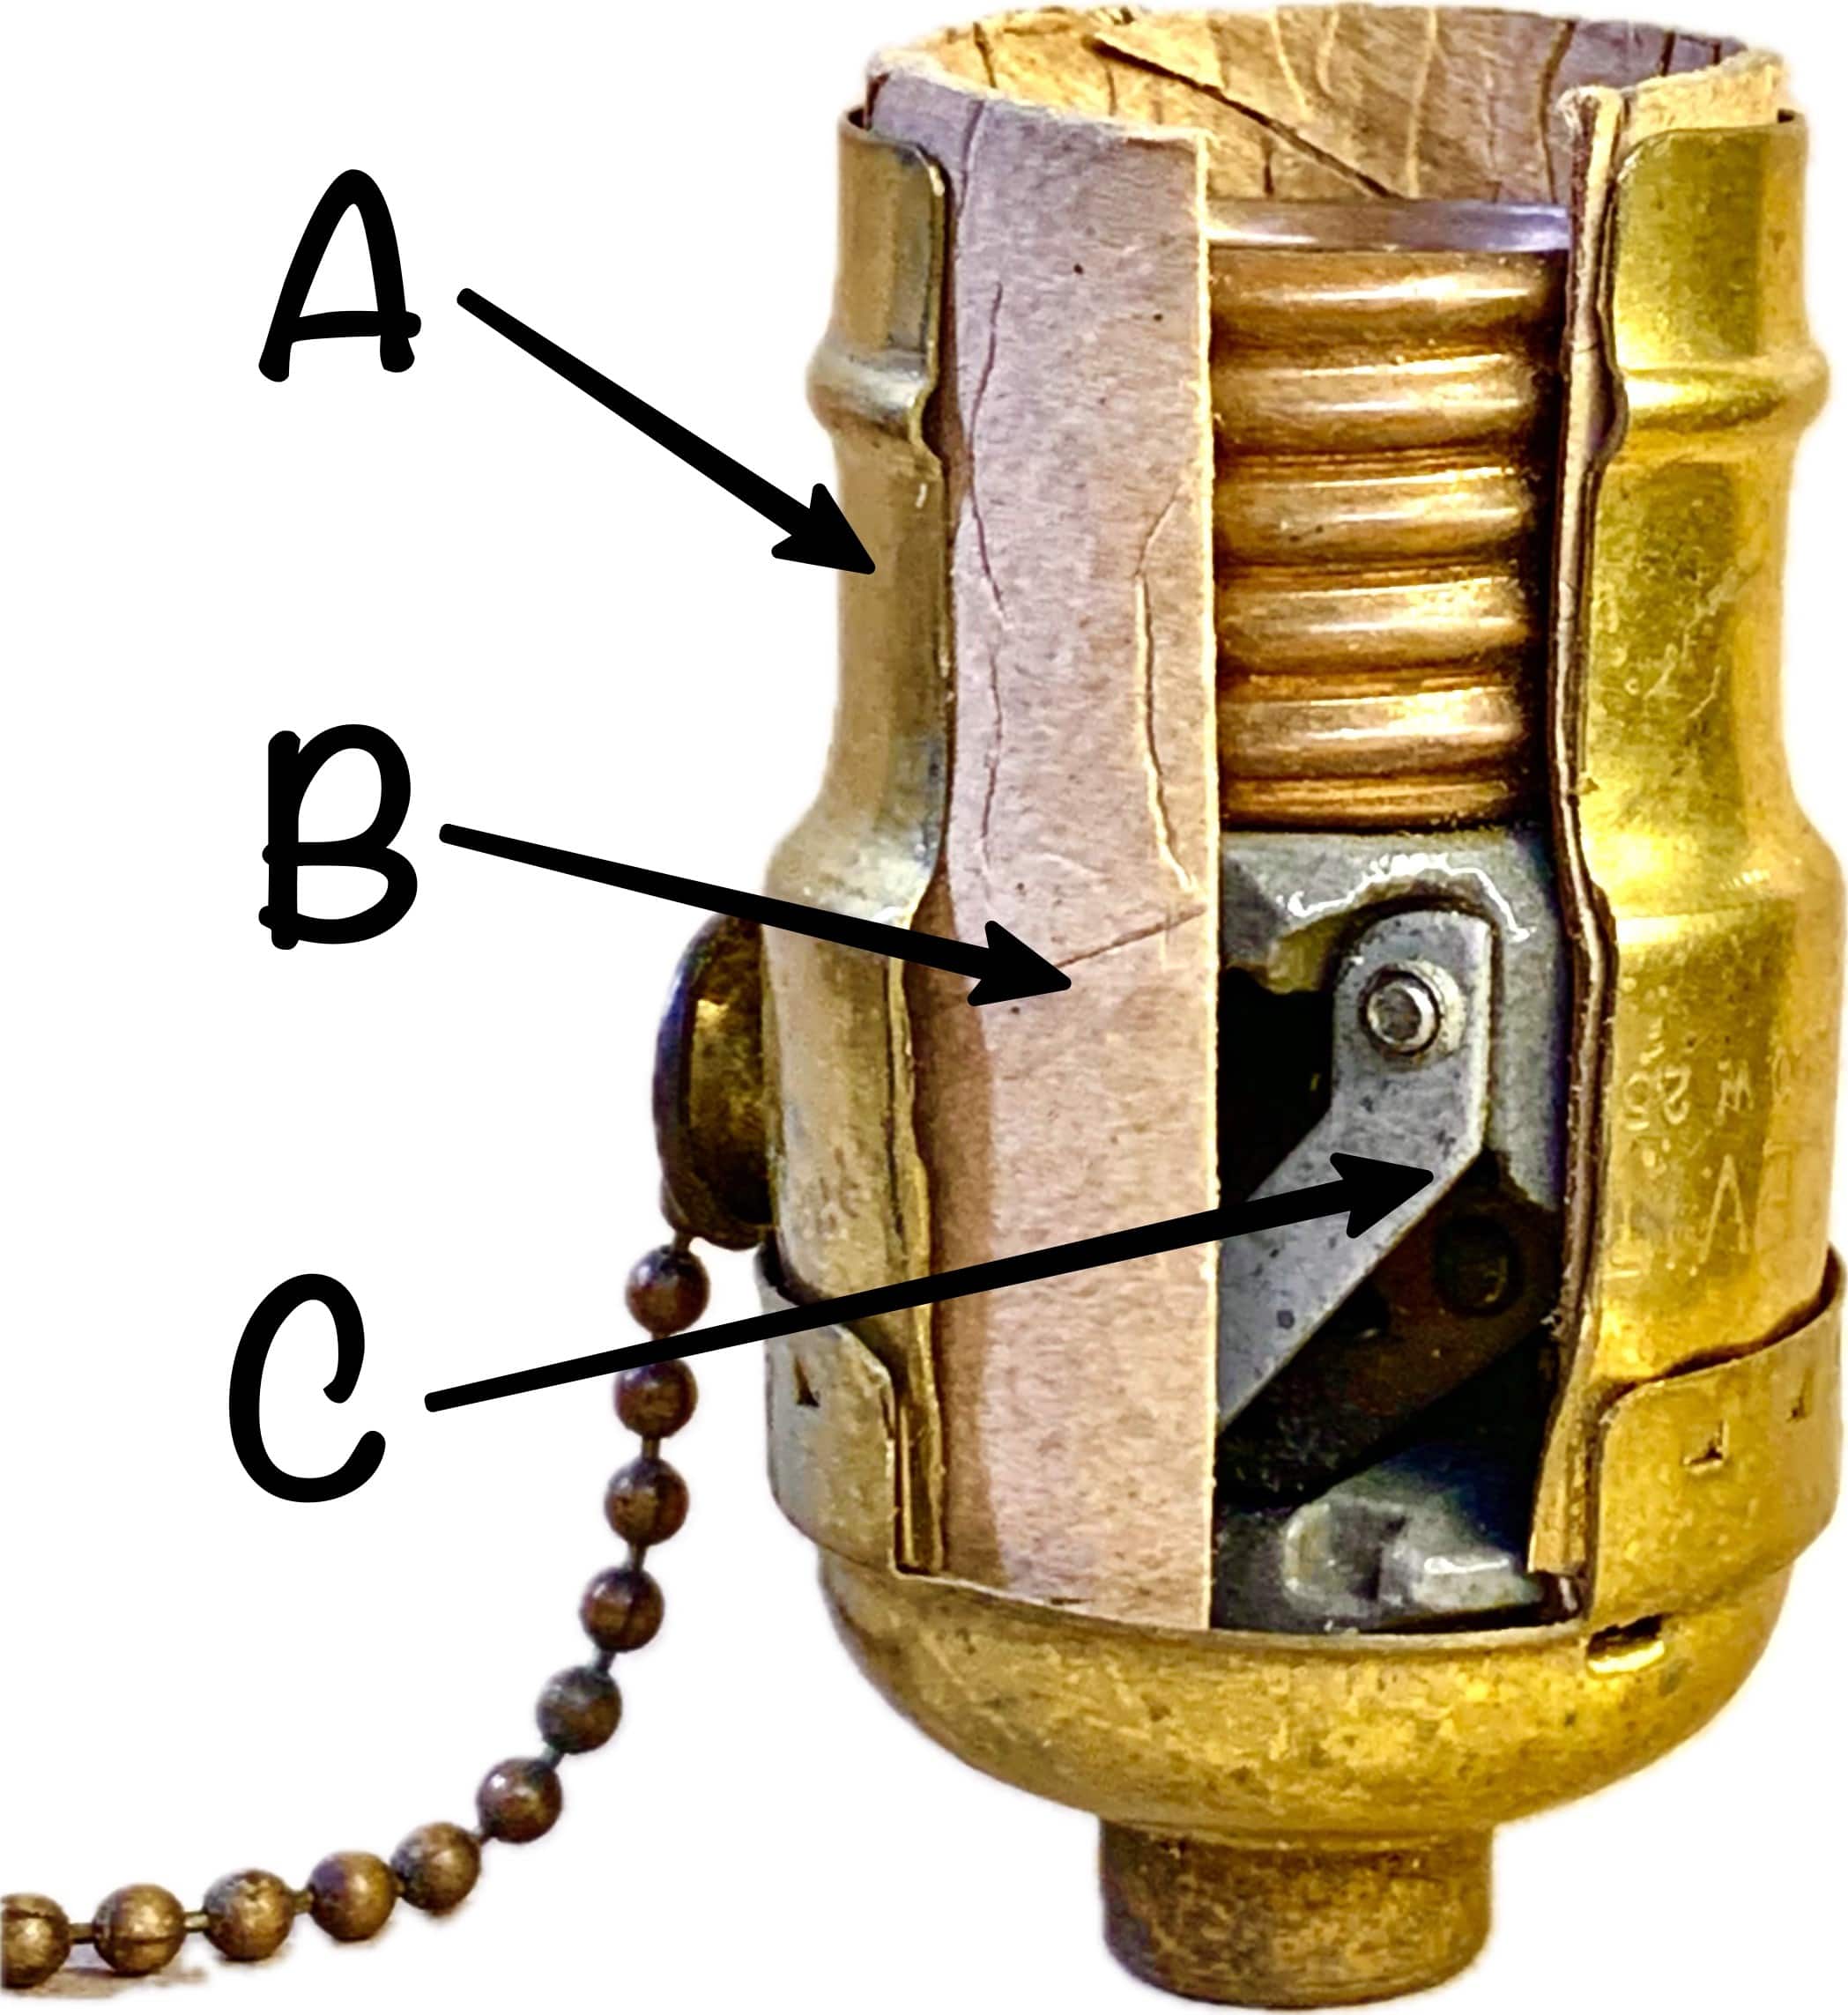 For identification purposes, The Lamp Repair Shop provides this cut-away to help identify the different components of a standard light bulb socket.